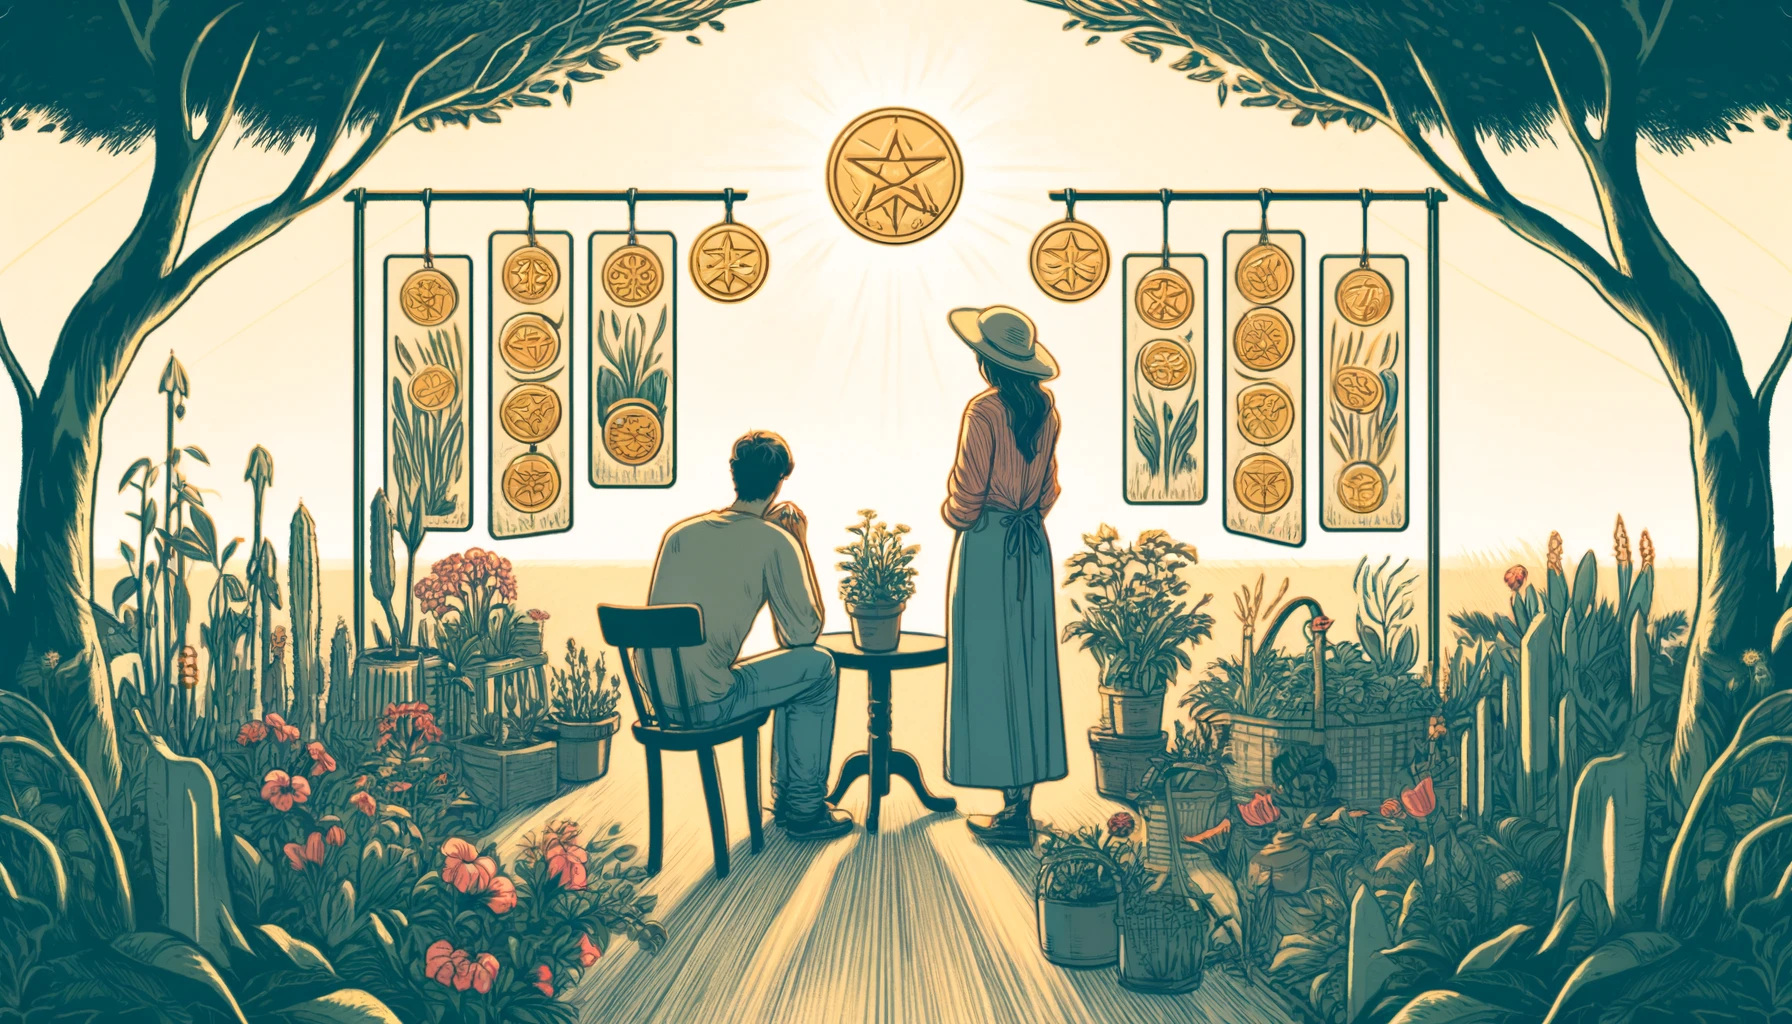 The image shows a couple standing together in a garden, surrounded by lush greenery and blooming flowers. They are engaged in thoughtful conversation as they examine the plants, symbolizing the growth and development of their relationship. Pentacles hang from the branches, representing milestones and achievements in their partnership. This scene embodies themes of reflection, patience, and the ongoing nurturing and care required in a relationship. It emphasizes the balance between appreciating the present state of the relationship and planning for continued growth and fulfillment.